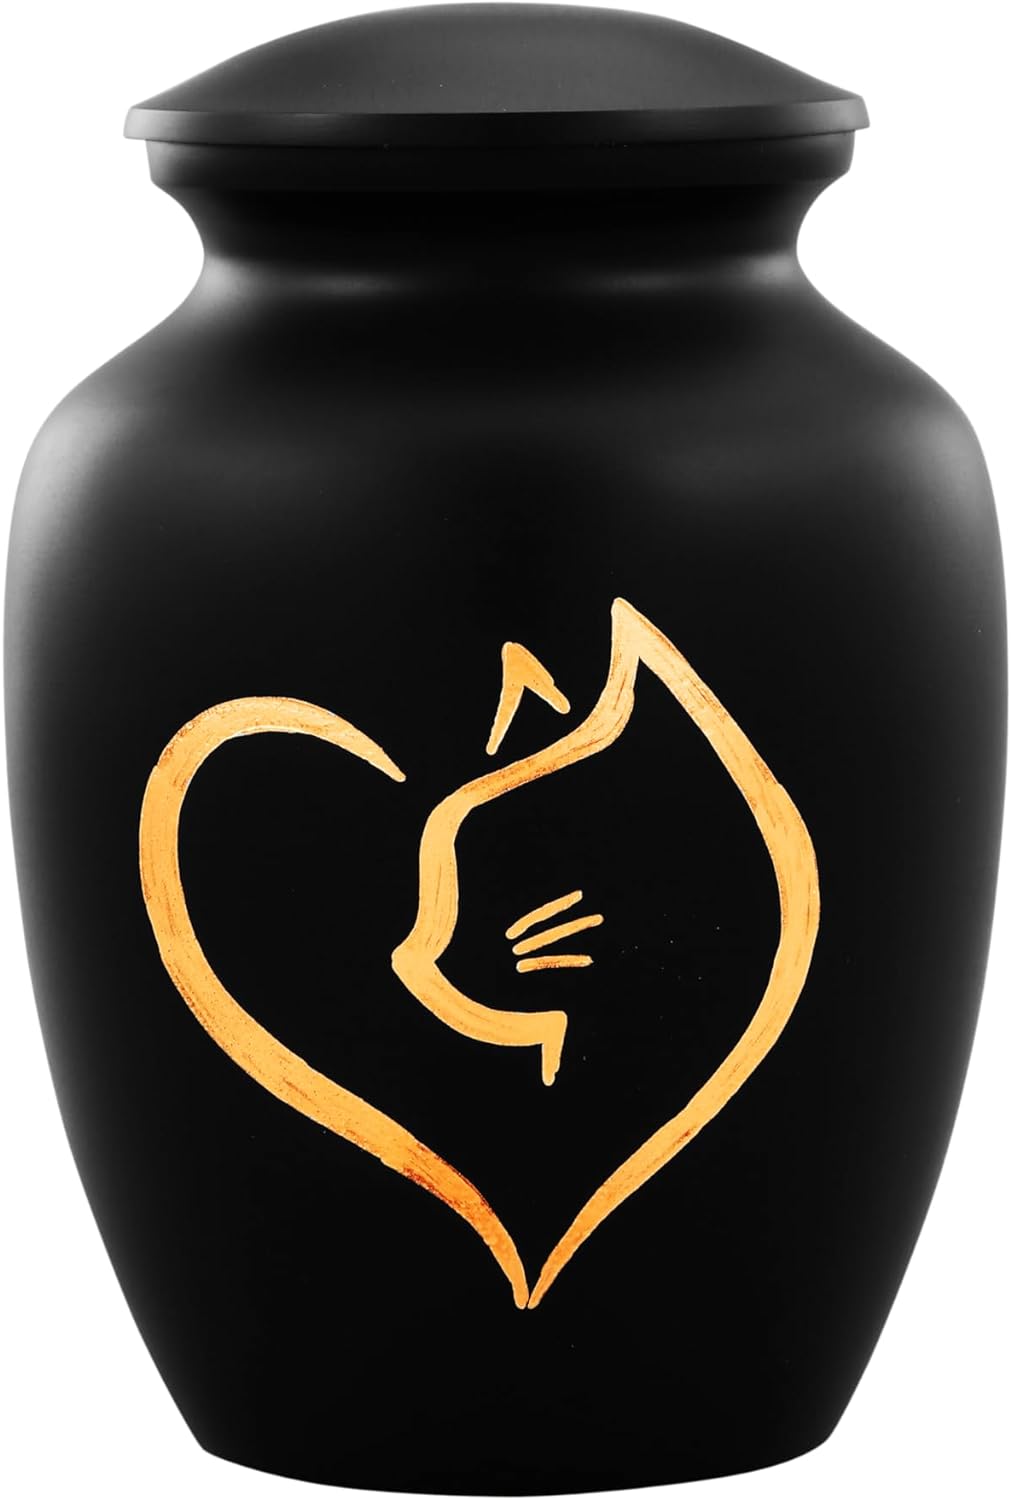 Black and gold Cat Urn with Optional Personalisation